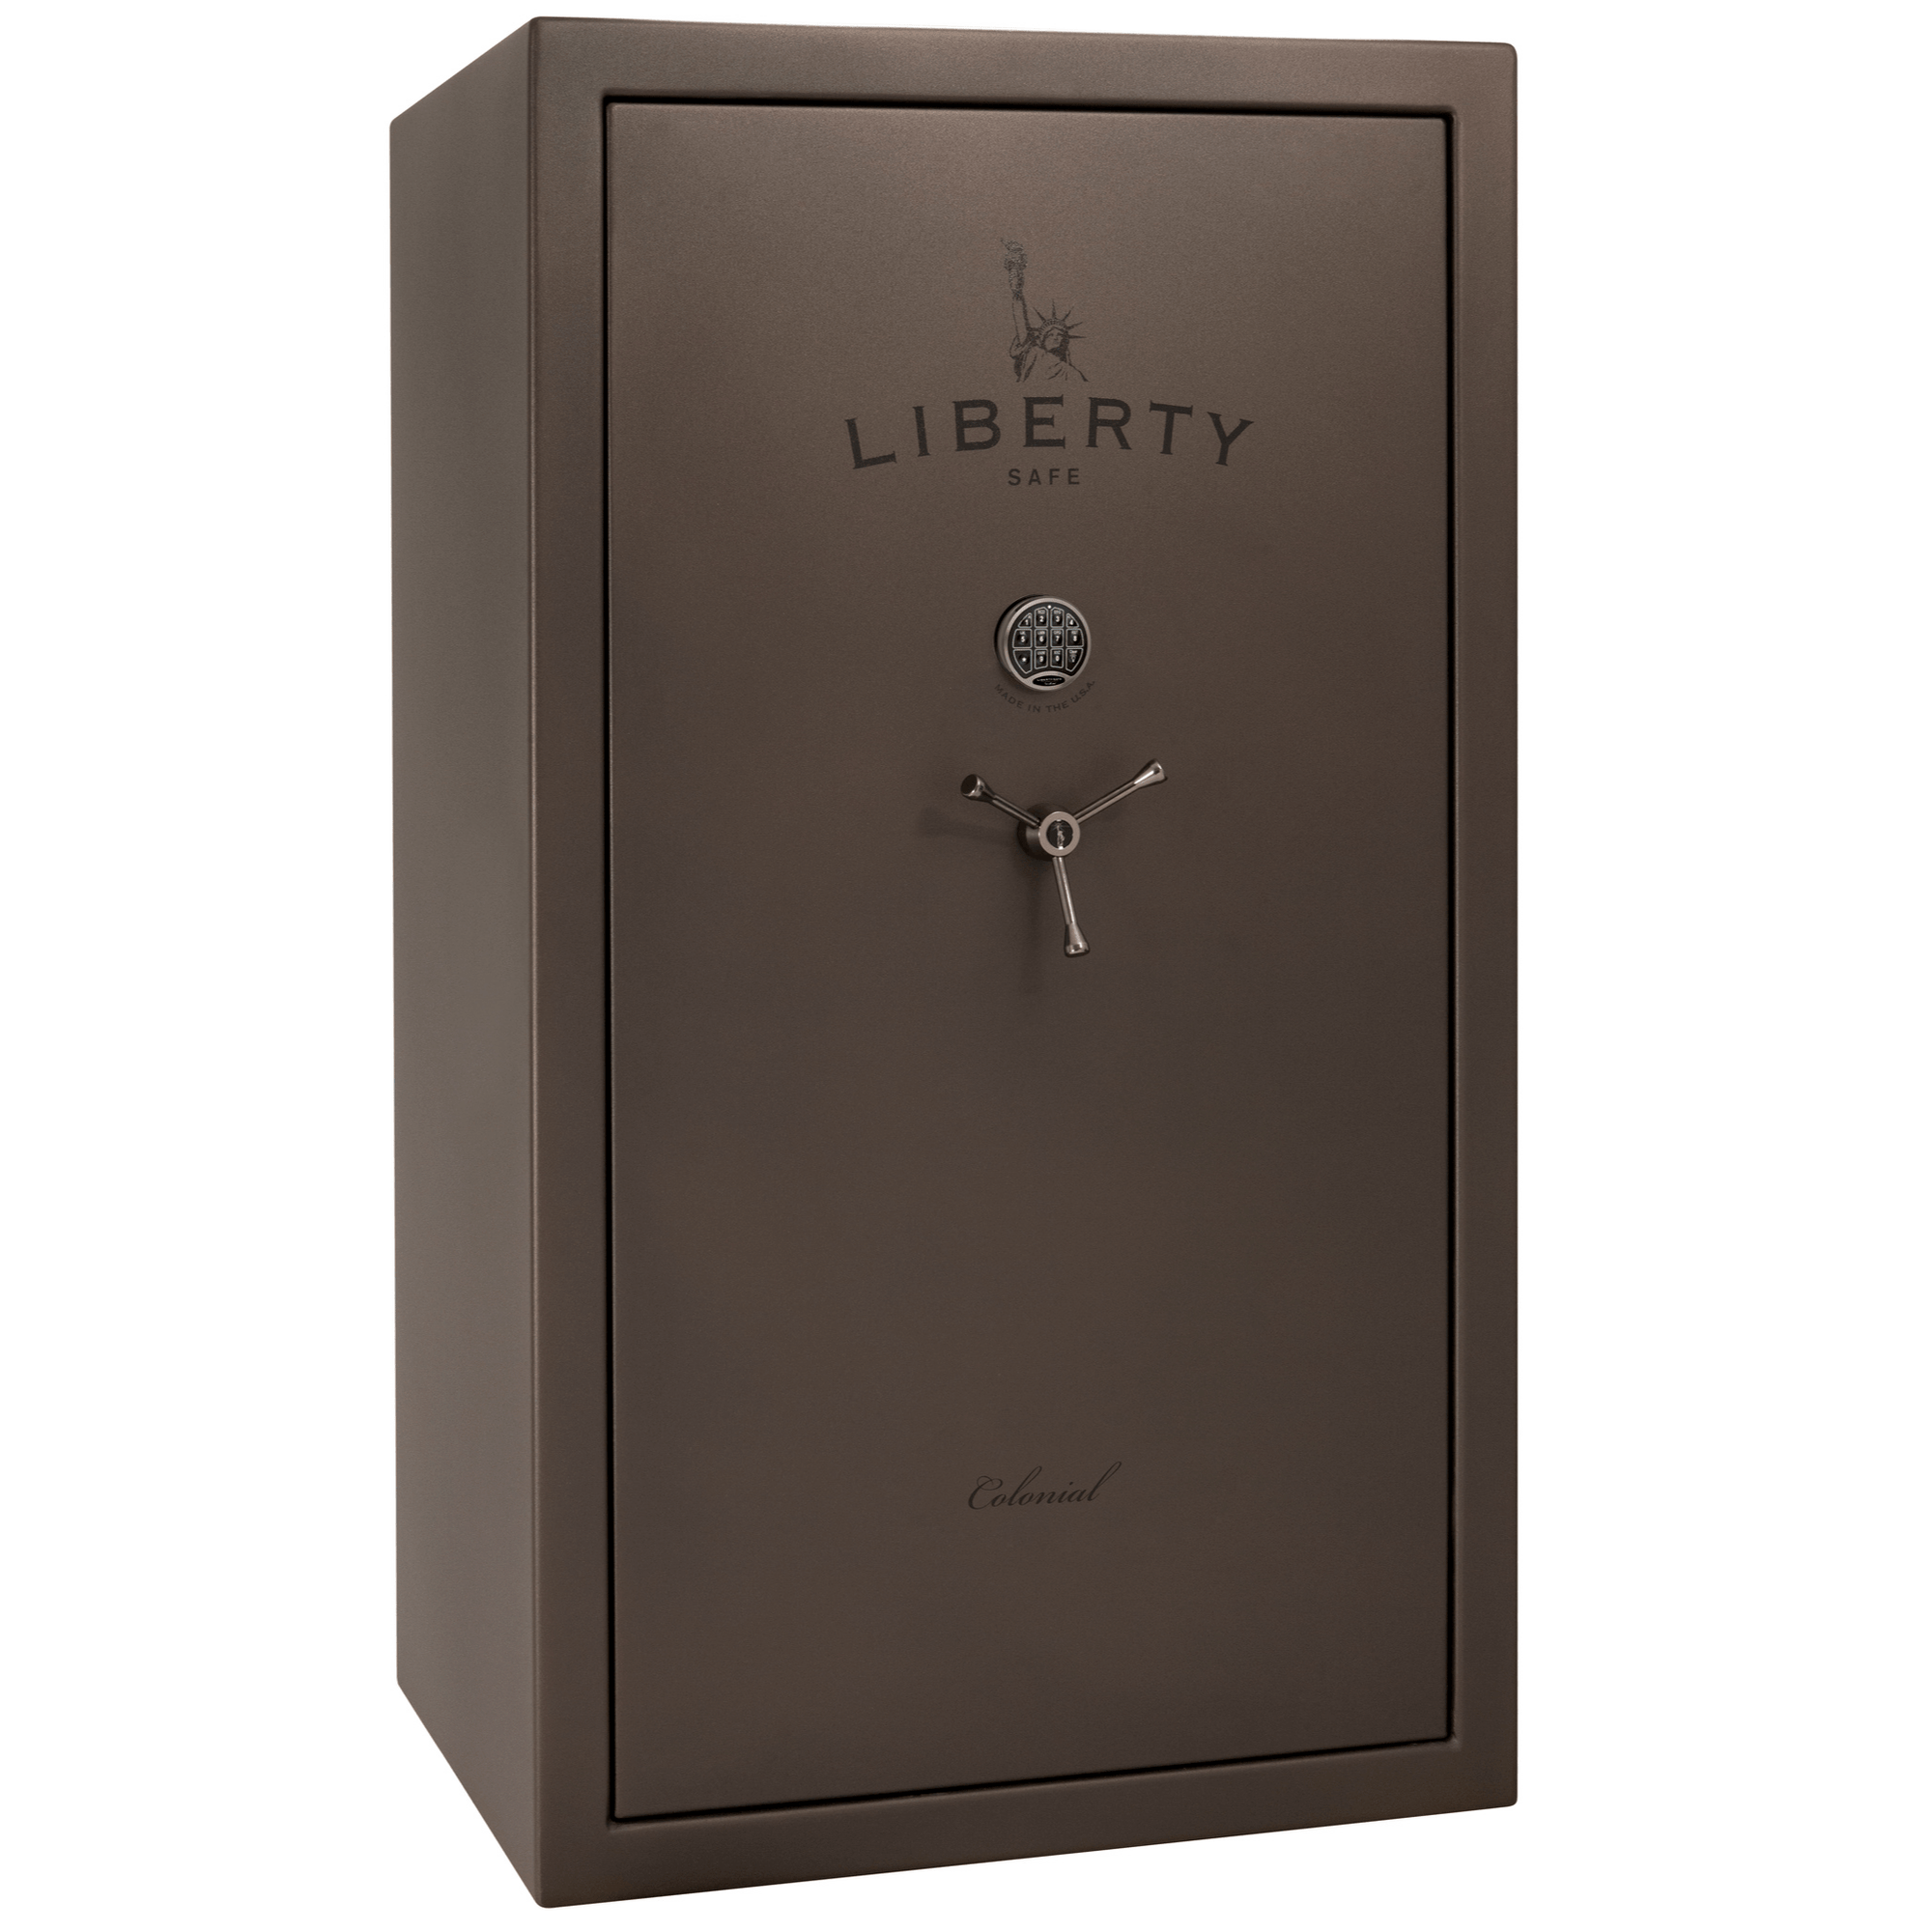 Colonial 50 | Level 4 Security | 75 Minute Fire Protection | Liberty Safe Norcal.